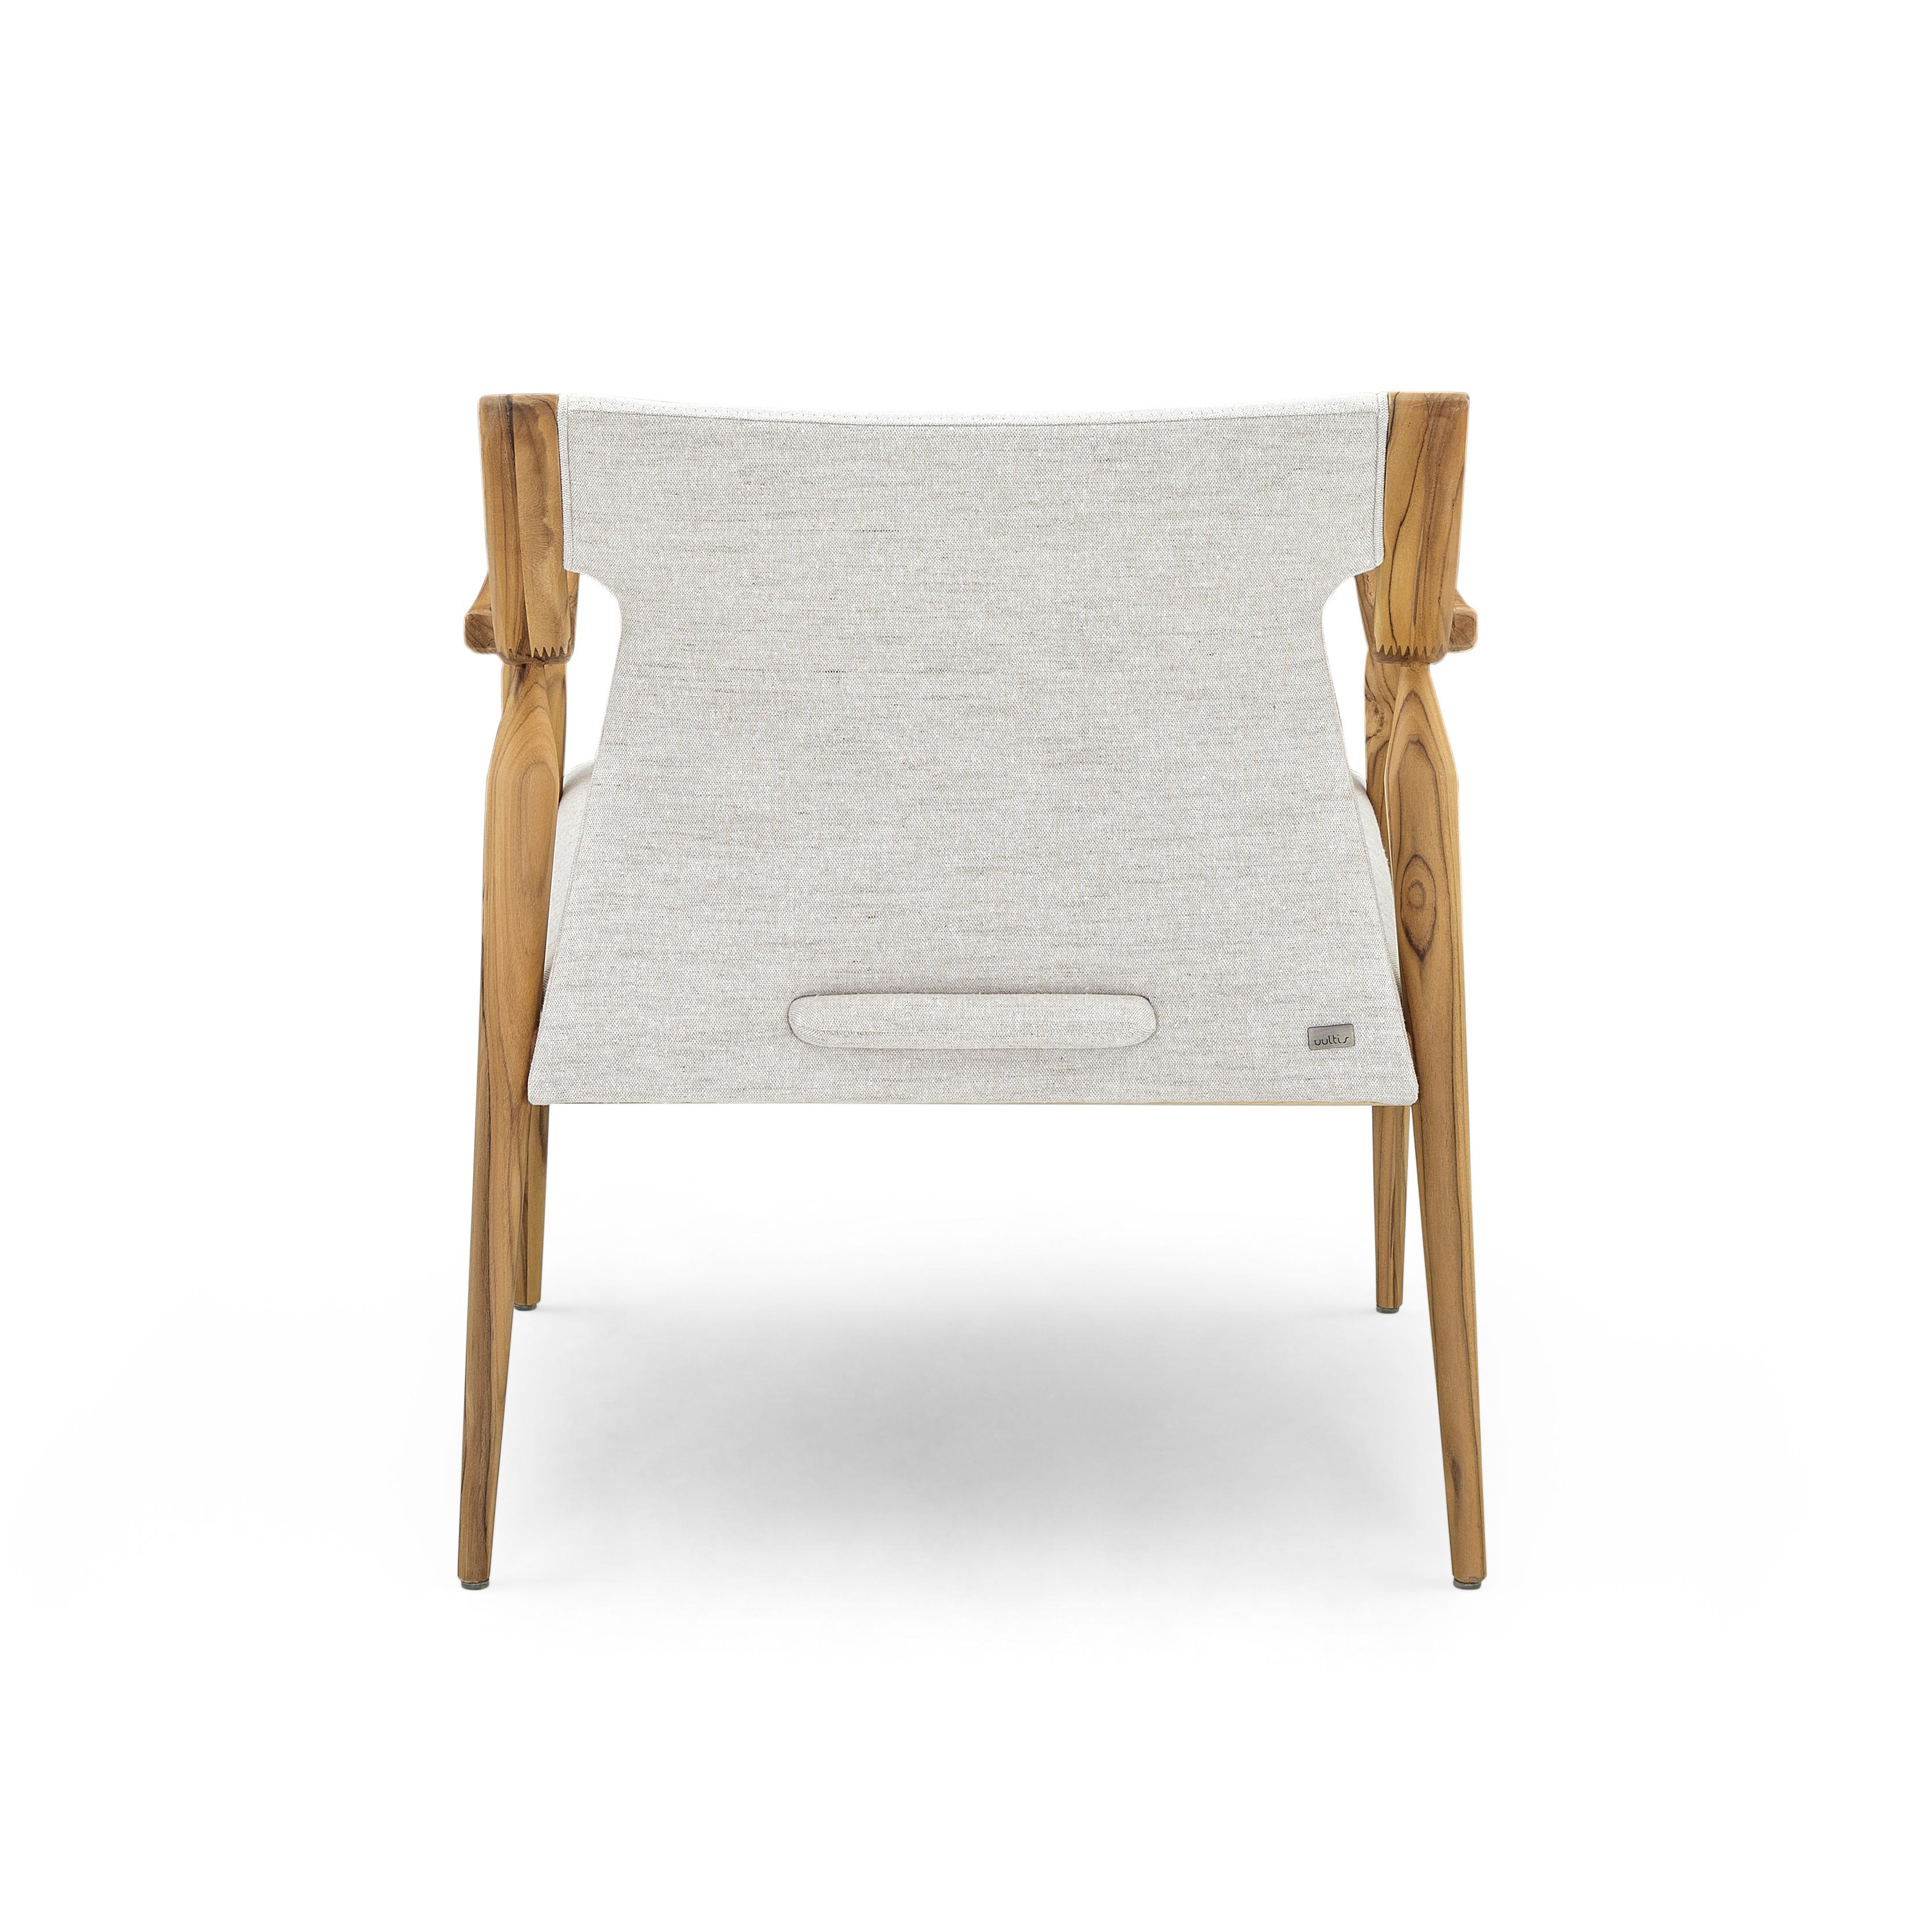 The Mince armchair is a welcoming addition to any room in your modern home decor with its teak finish curved arms and spindle legs, and an off-white beautiful and soft fabric for the cushions. This modern chair has a clean minimalist simple design